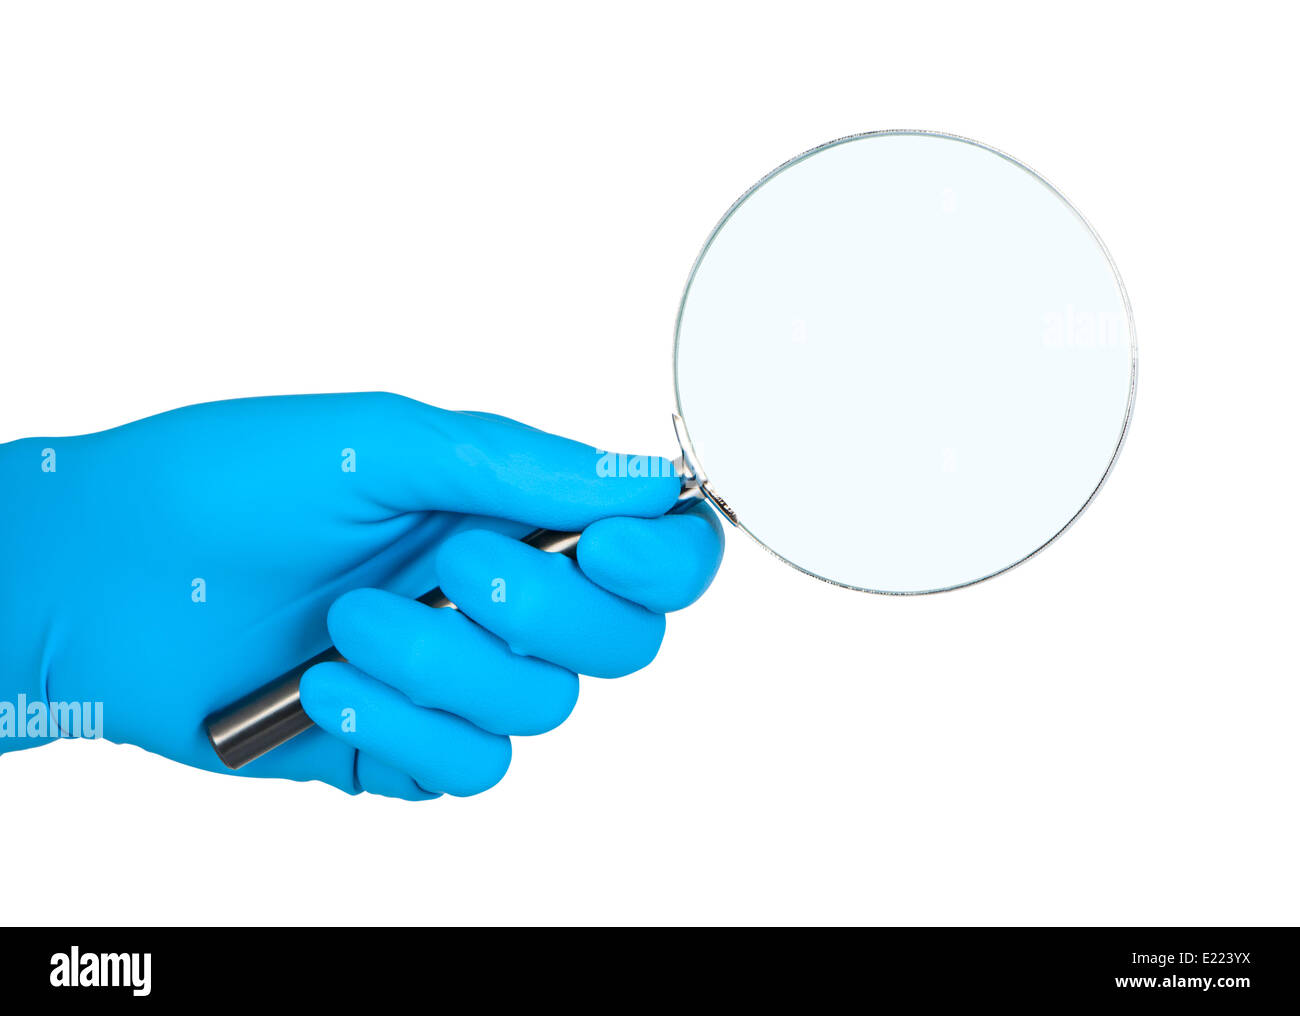 Hand in rubber glove holding magnifier. Stock Photo